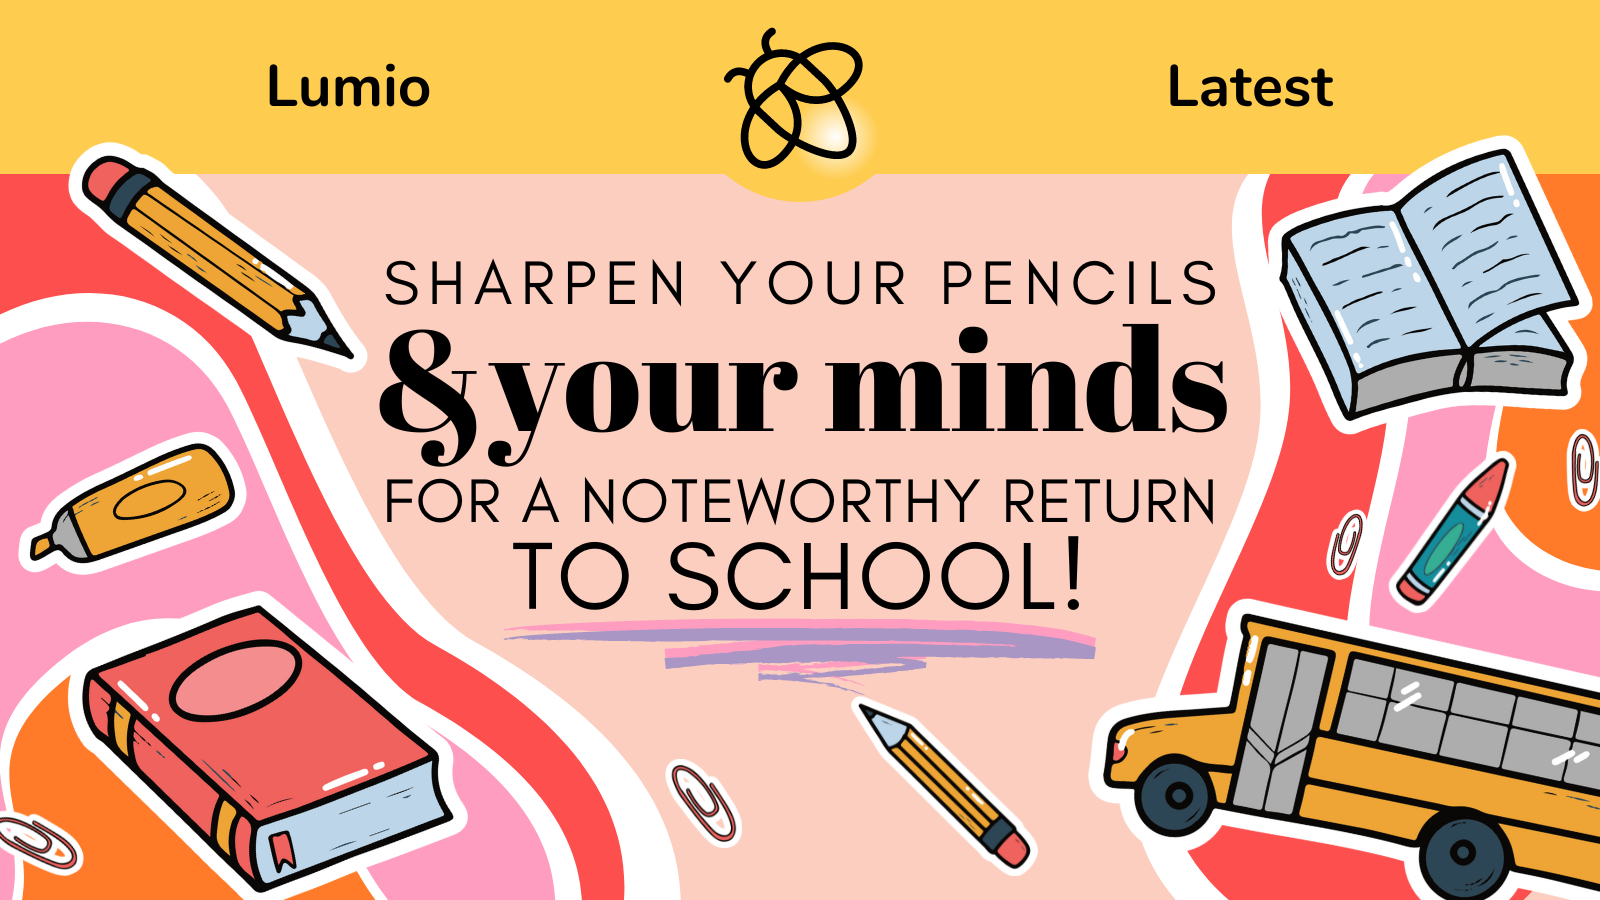 Sharpen your minds and pencils for a noteworthy return to school! (5)